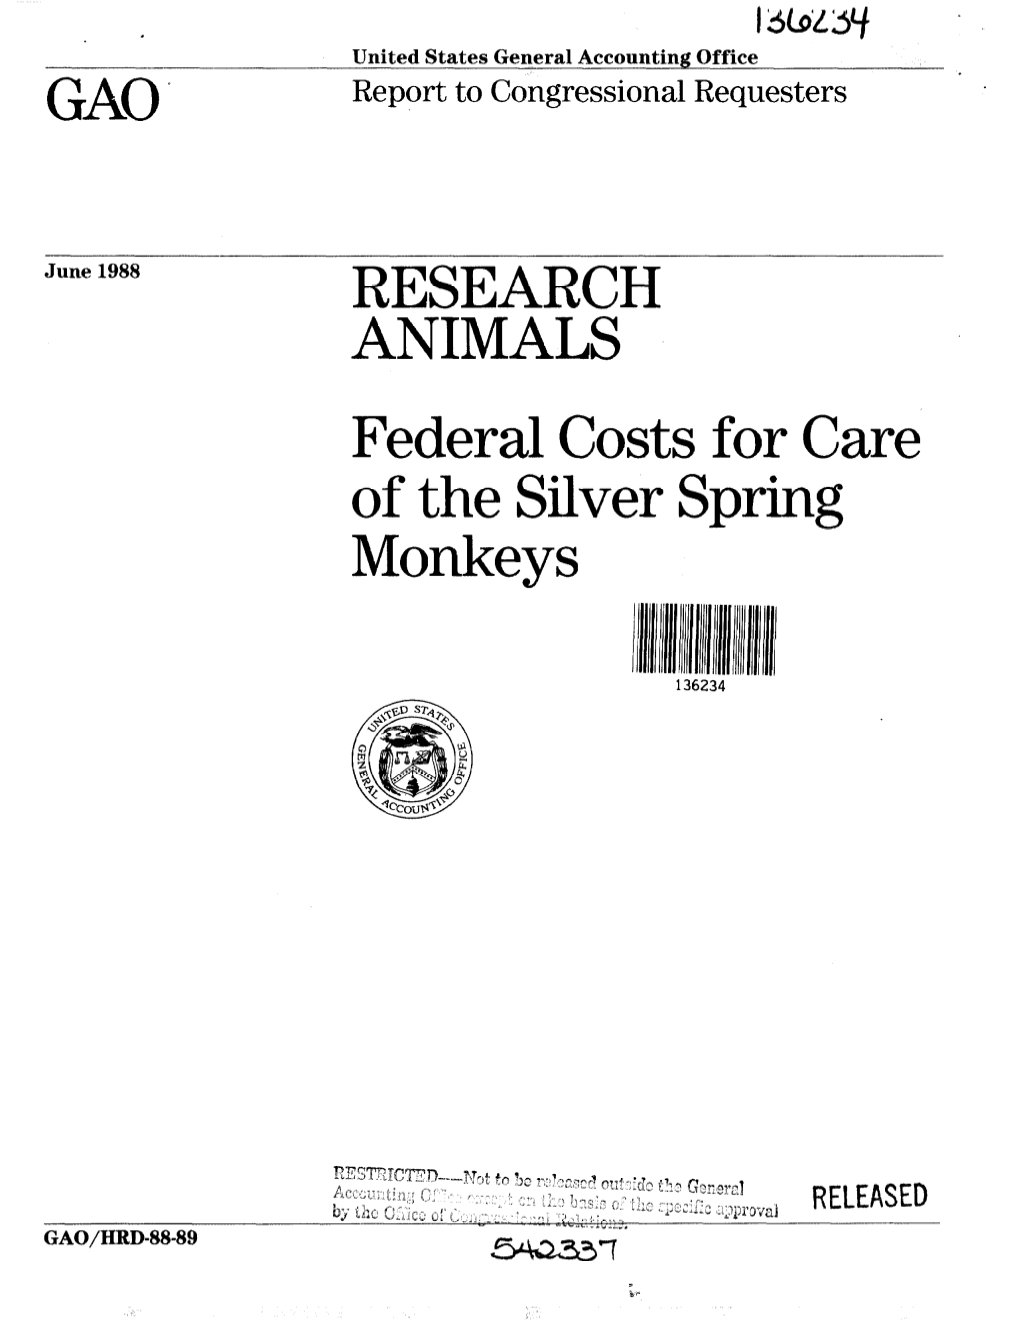 HRD-88-89 Research Animals: Federal Costs for Care of the Silver Spring Monkeys